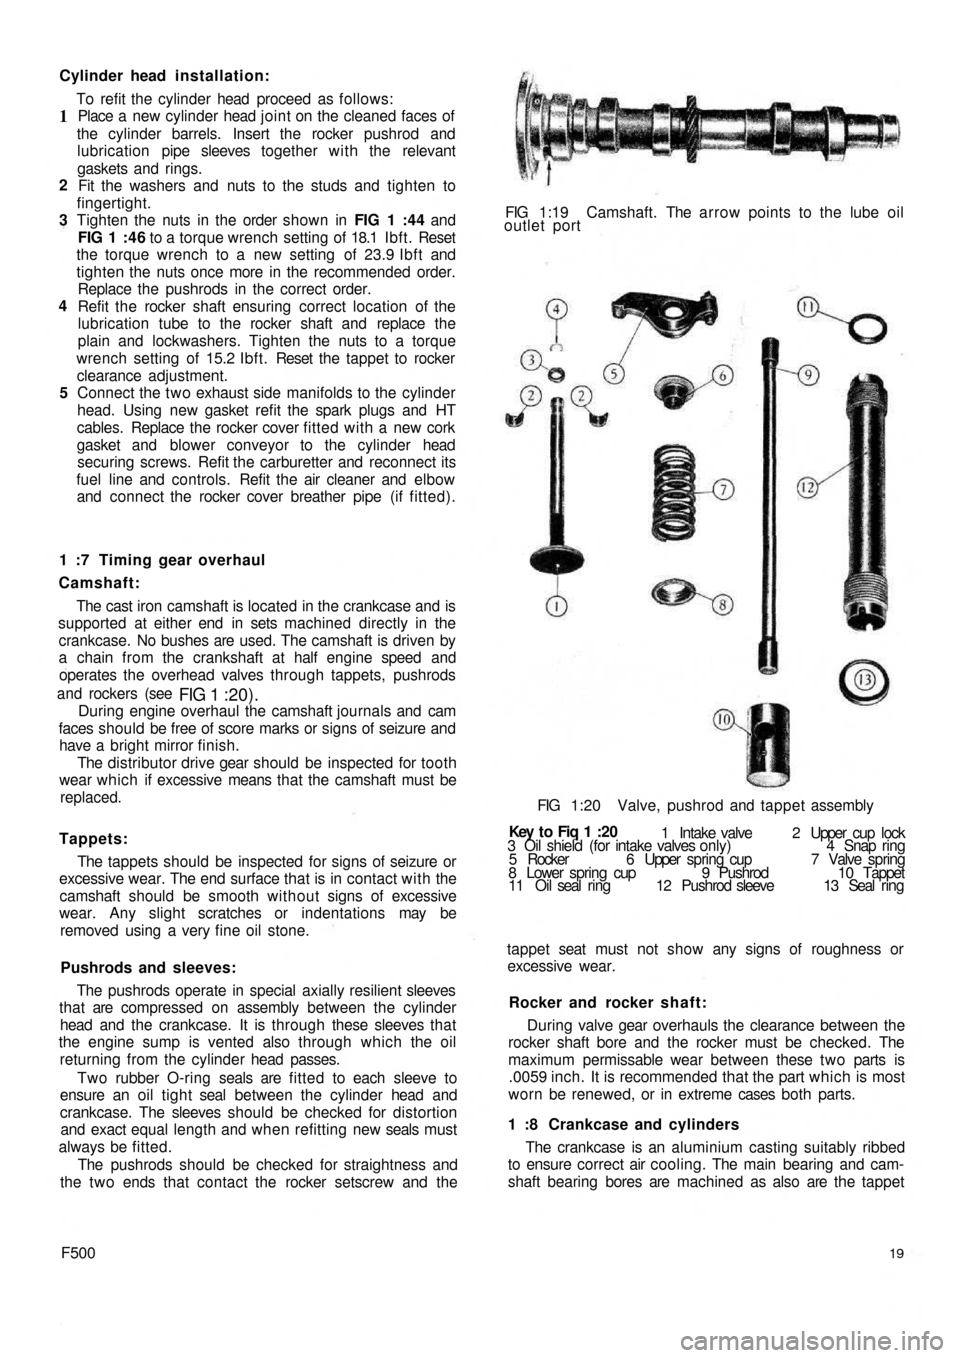 FIAT 500 1960 1.G User Guide Cylinder head installation:
To refit the cylinder head proceed as follows:
Place a  new cylinder  head joint on the cleaned faces of
the cylinder barrels. Insert the rocker pushrod and
lubrication pip